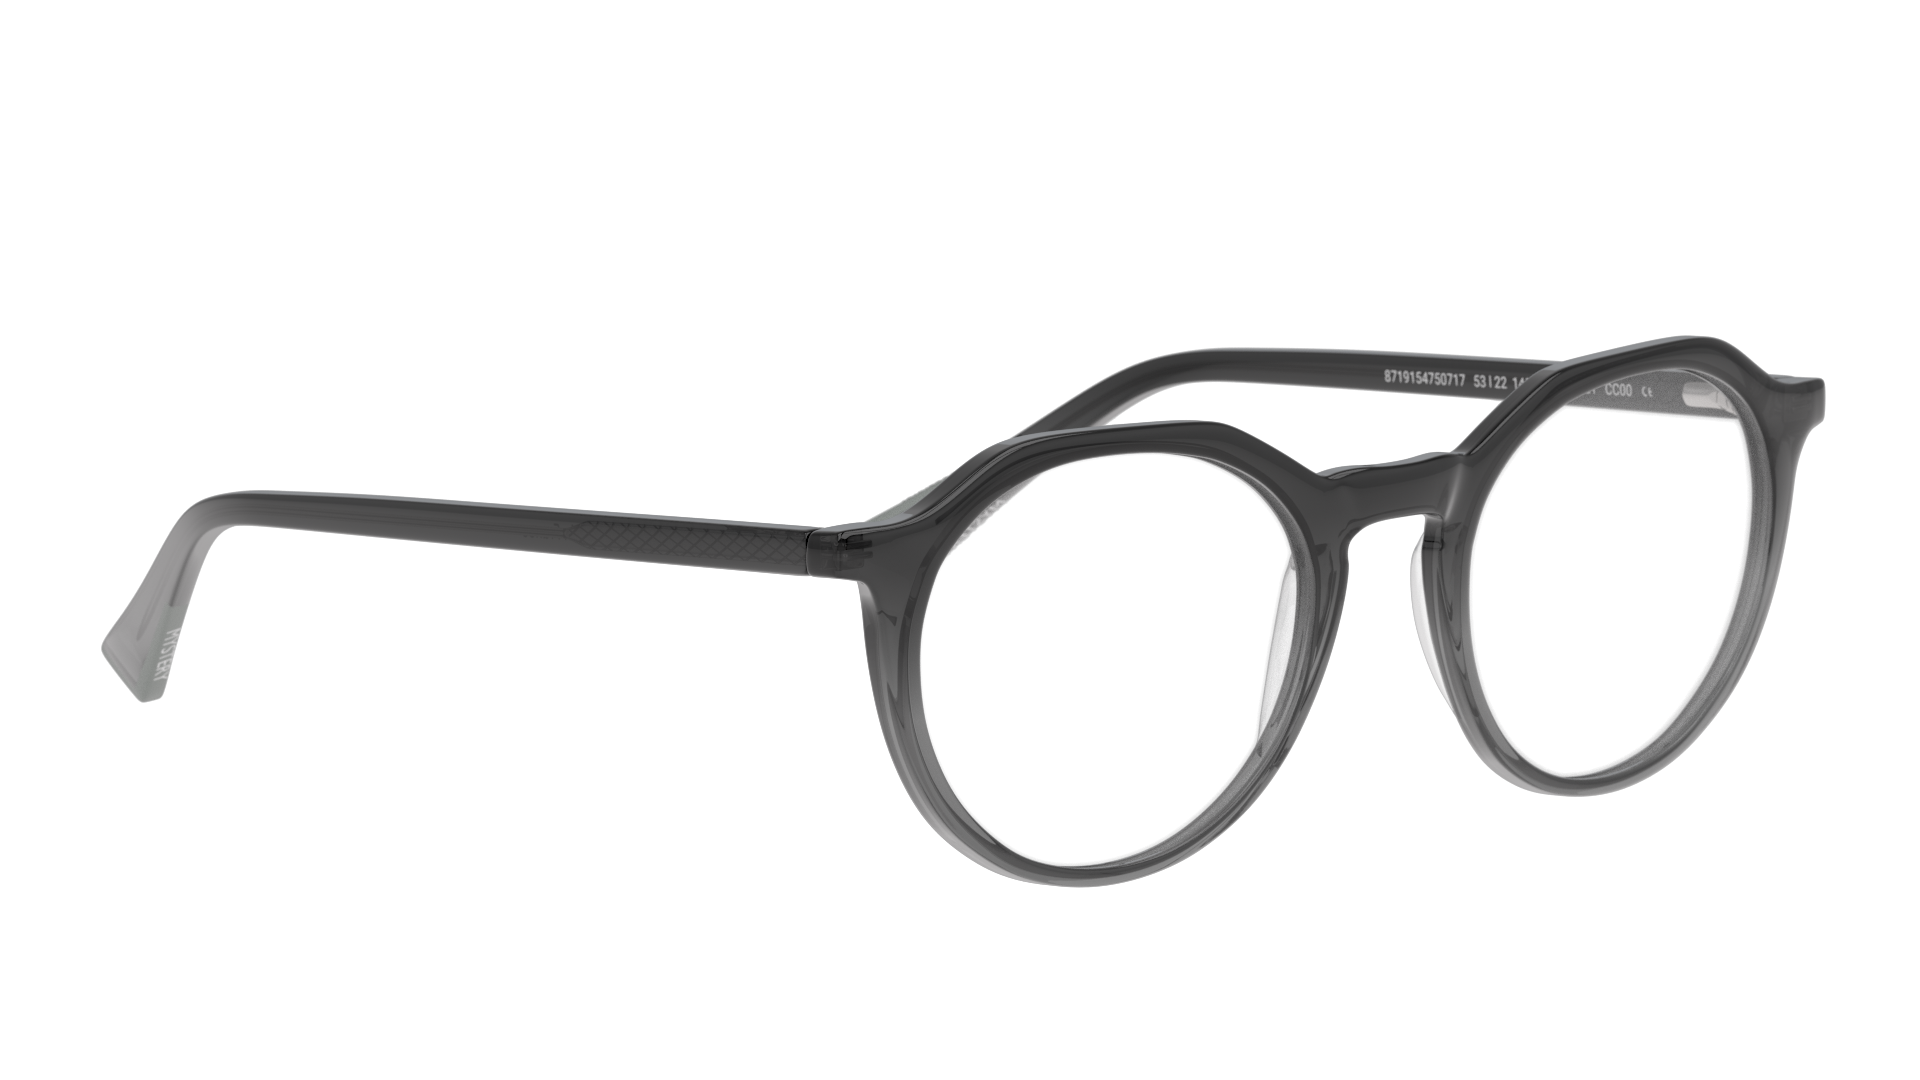 Angle_Right01 Unofficial UNOM0123 (GT00) Glasses Transparent / Grey